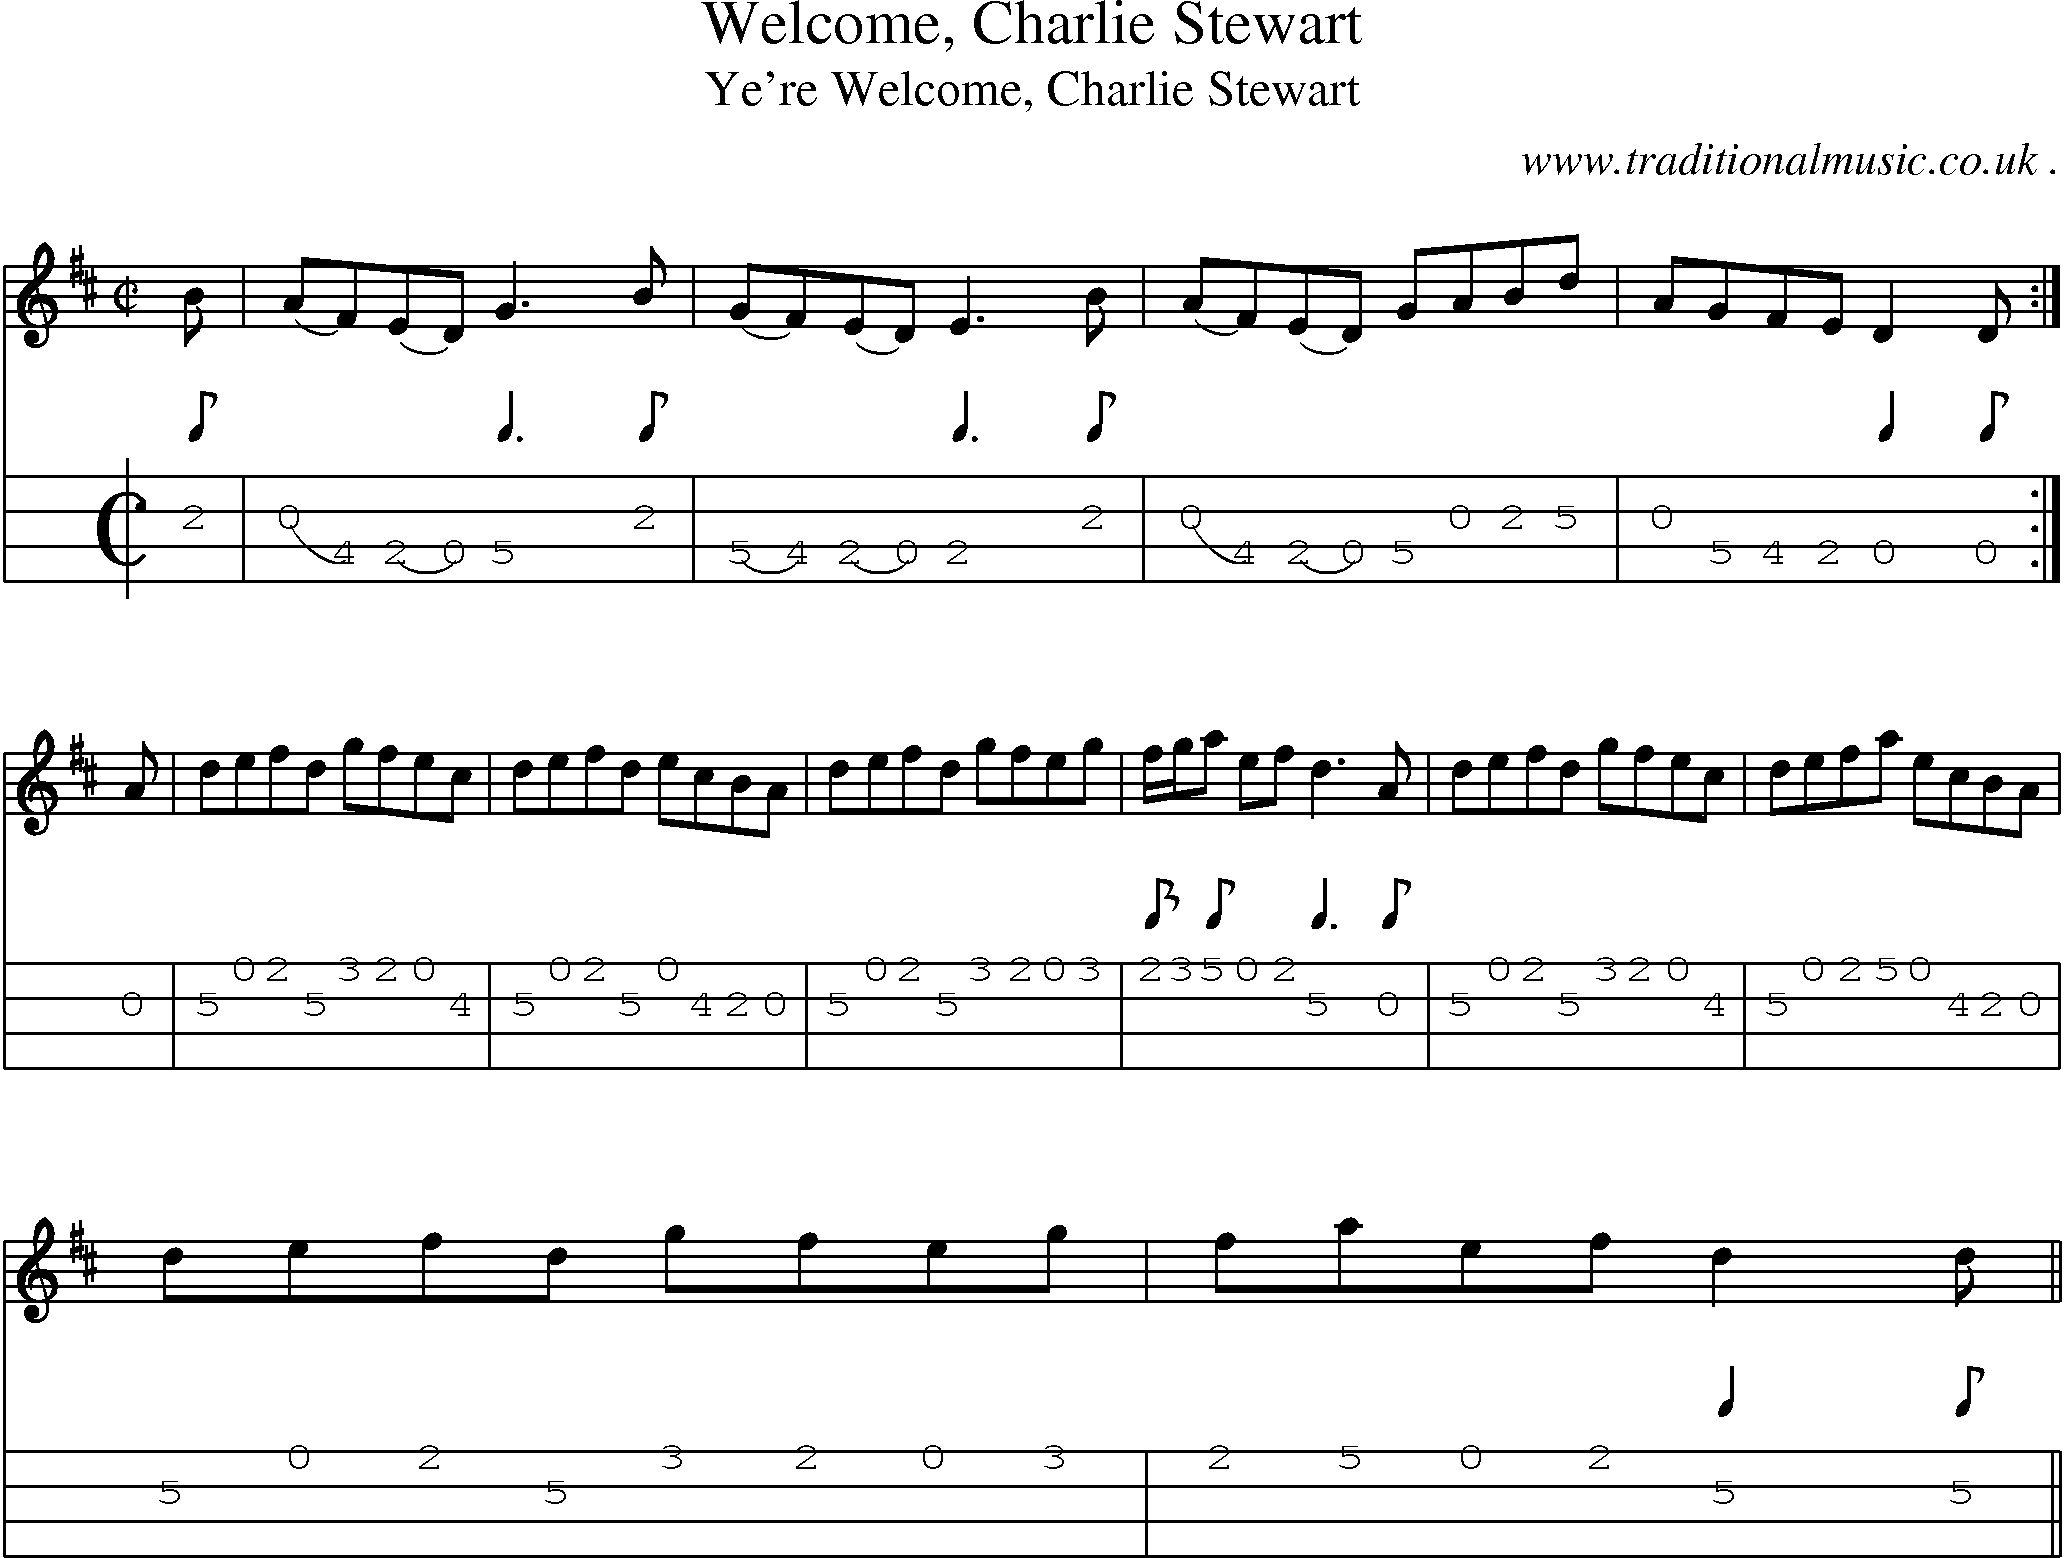 Sheet-music  score, Chords and Mandolin Tabs for Welcome Charlie Stewart